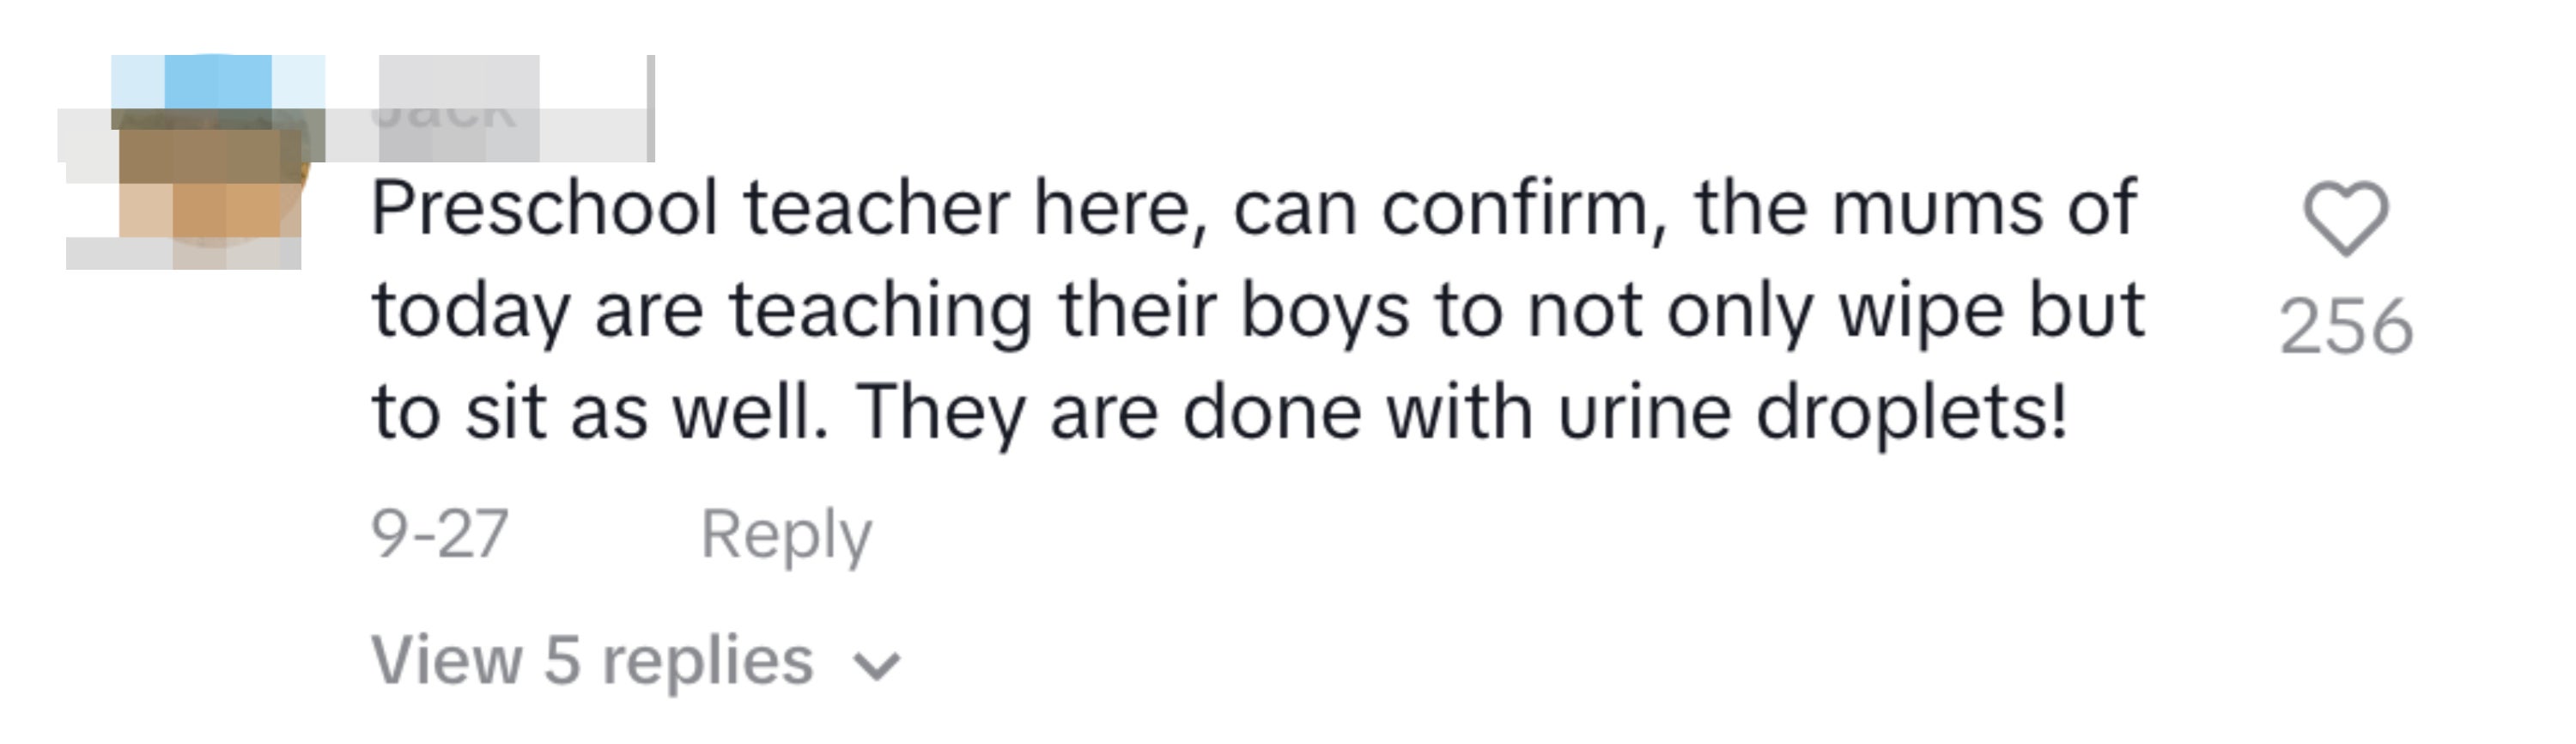 &quot;can confirm here, the mums of today are teaching their boys to not only wipe but to sit as well. They are done with urine droplets&quot;